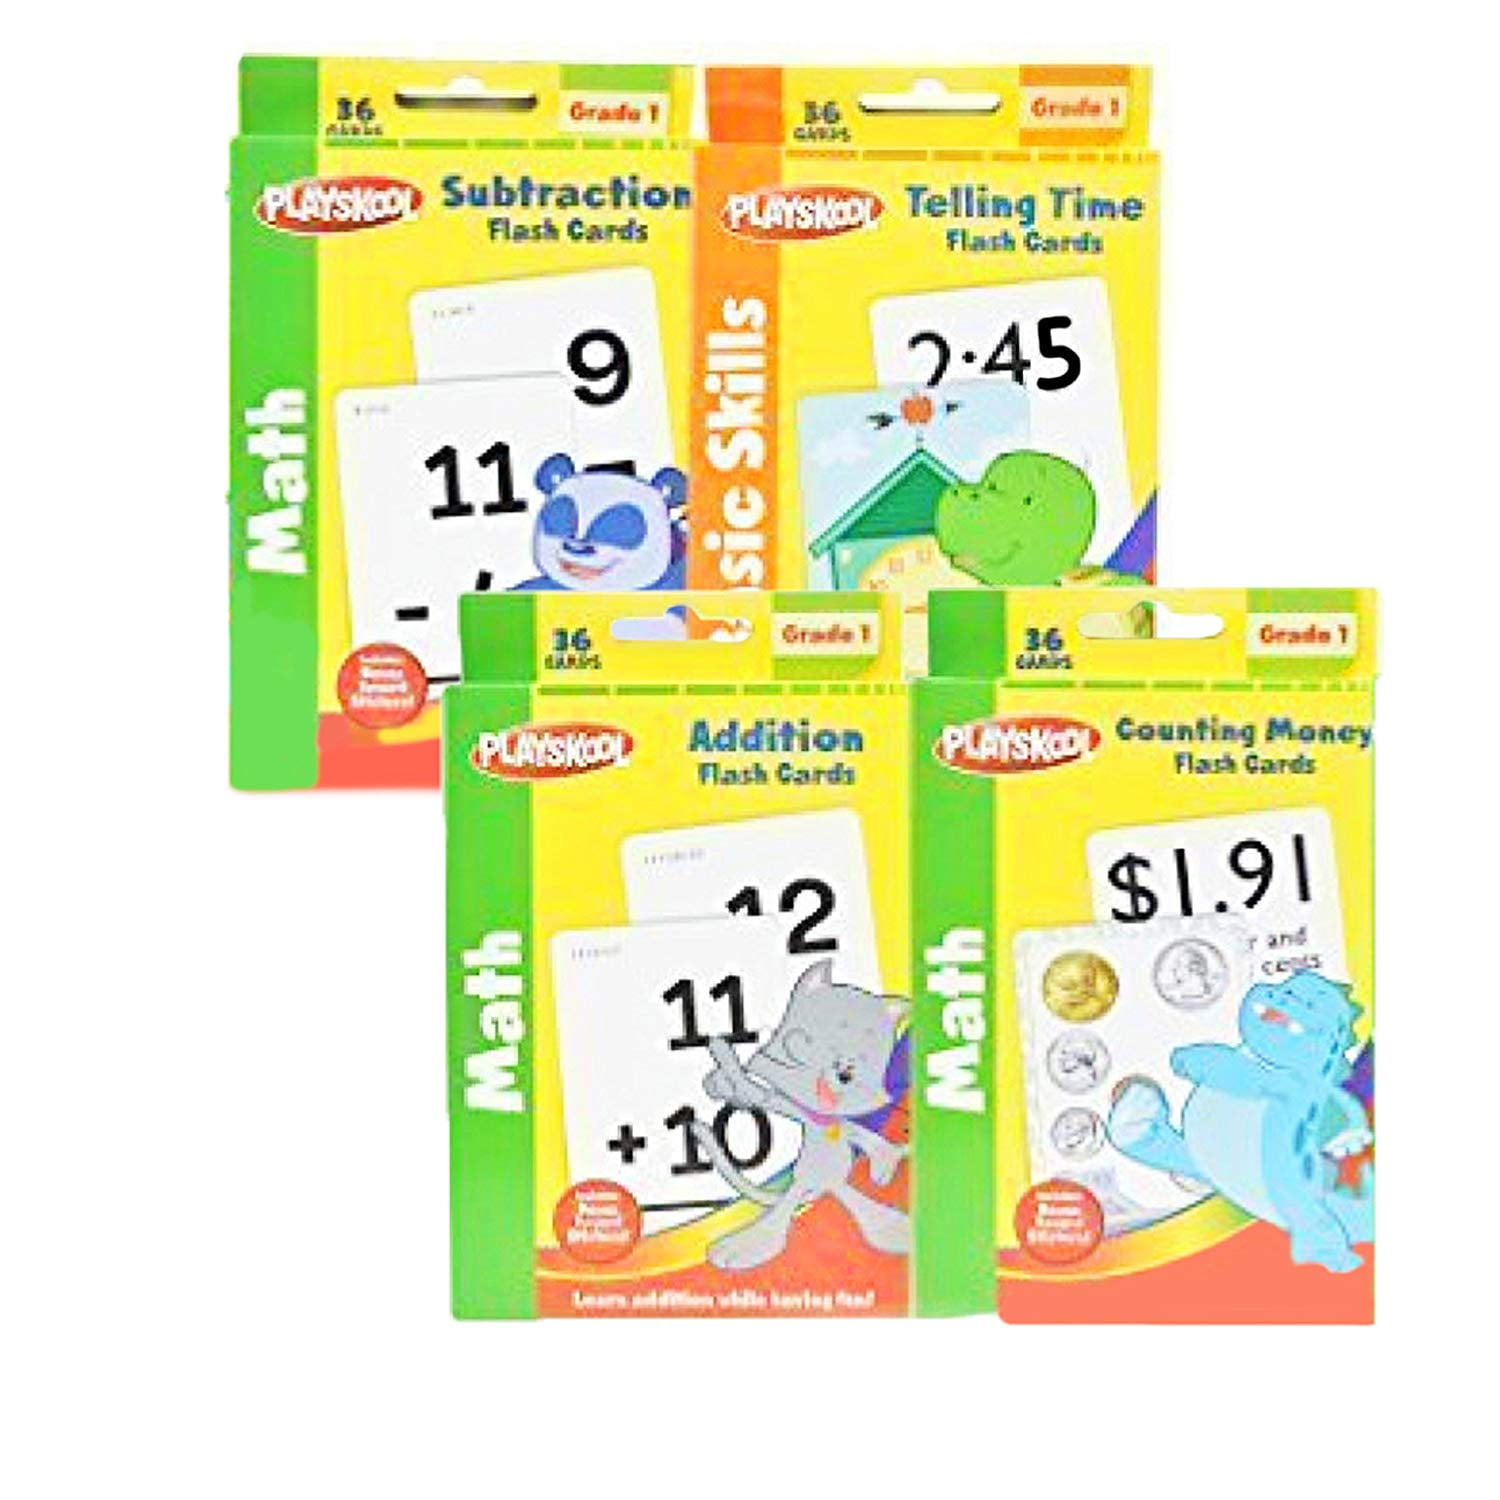 1st-grade-math-flash-cards-with-stickers-by-4-pack-includes-4